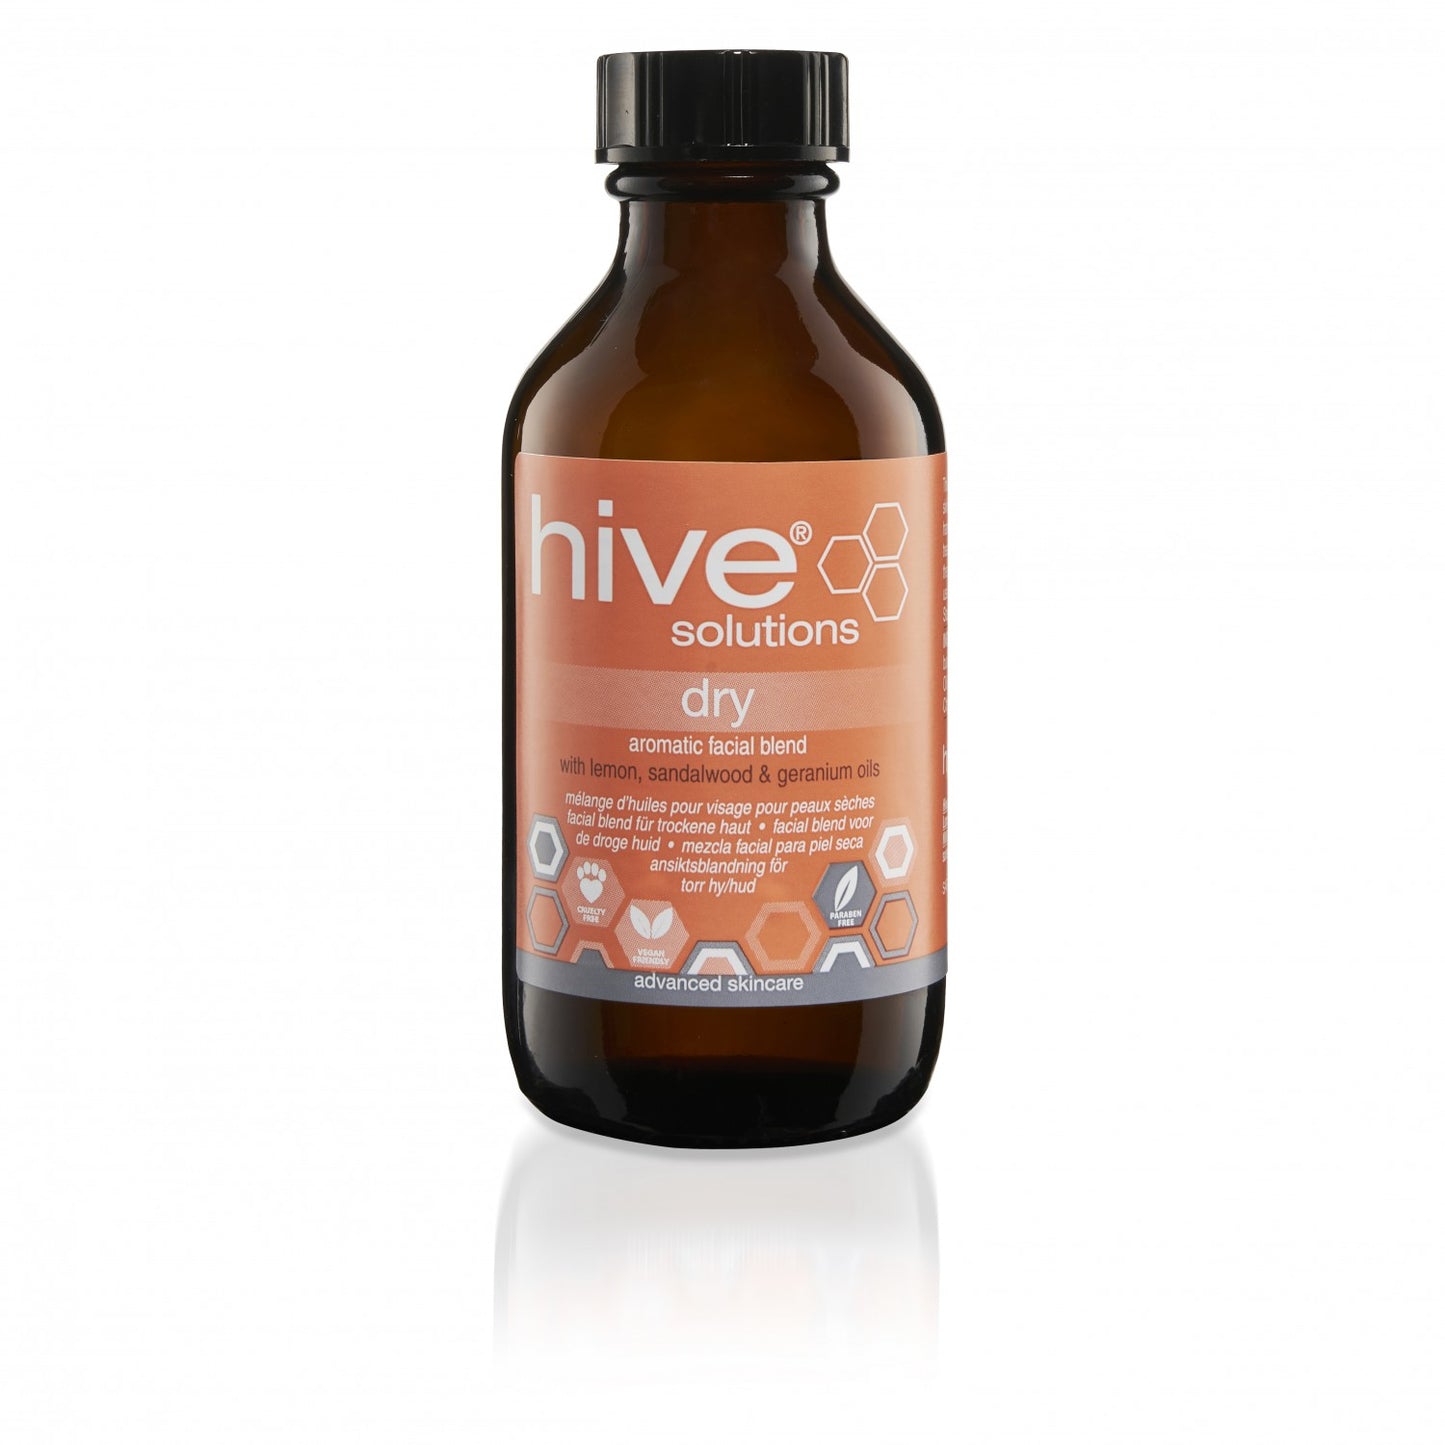 Hive Simply Aromatic Facial Blend (Dry) 75ml